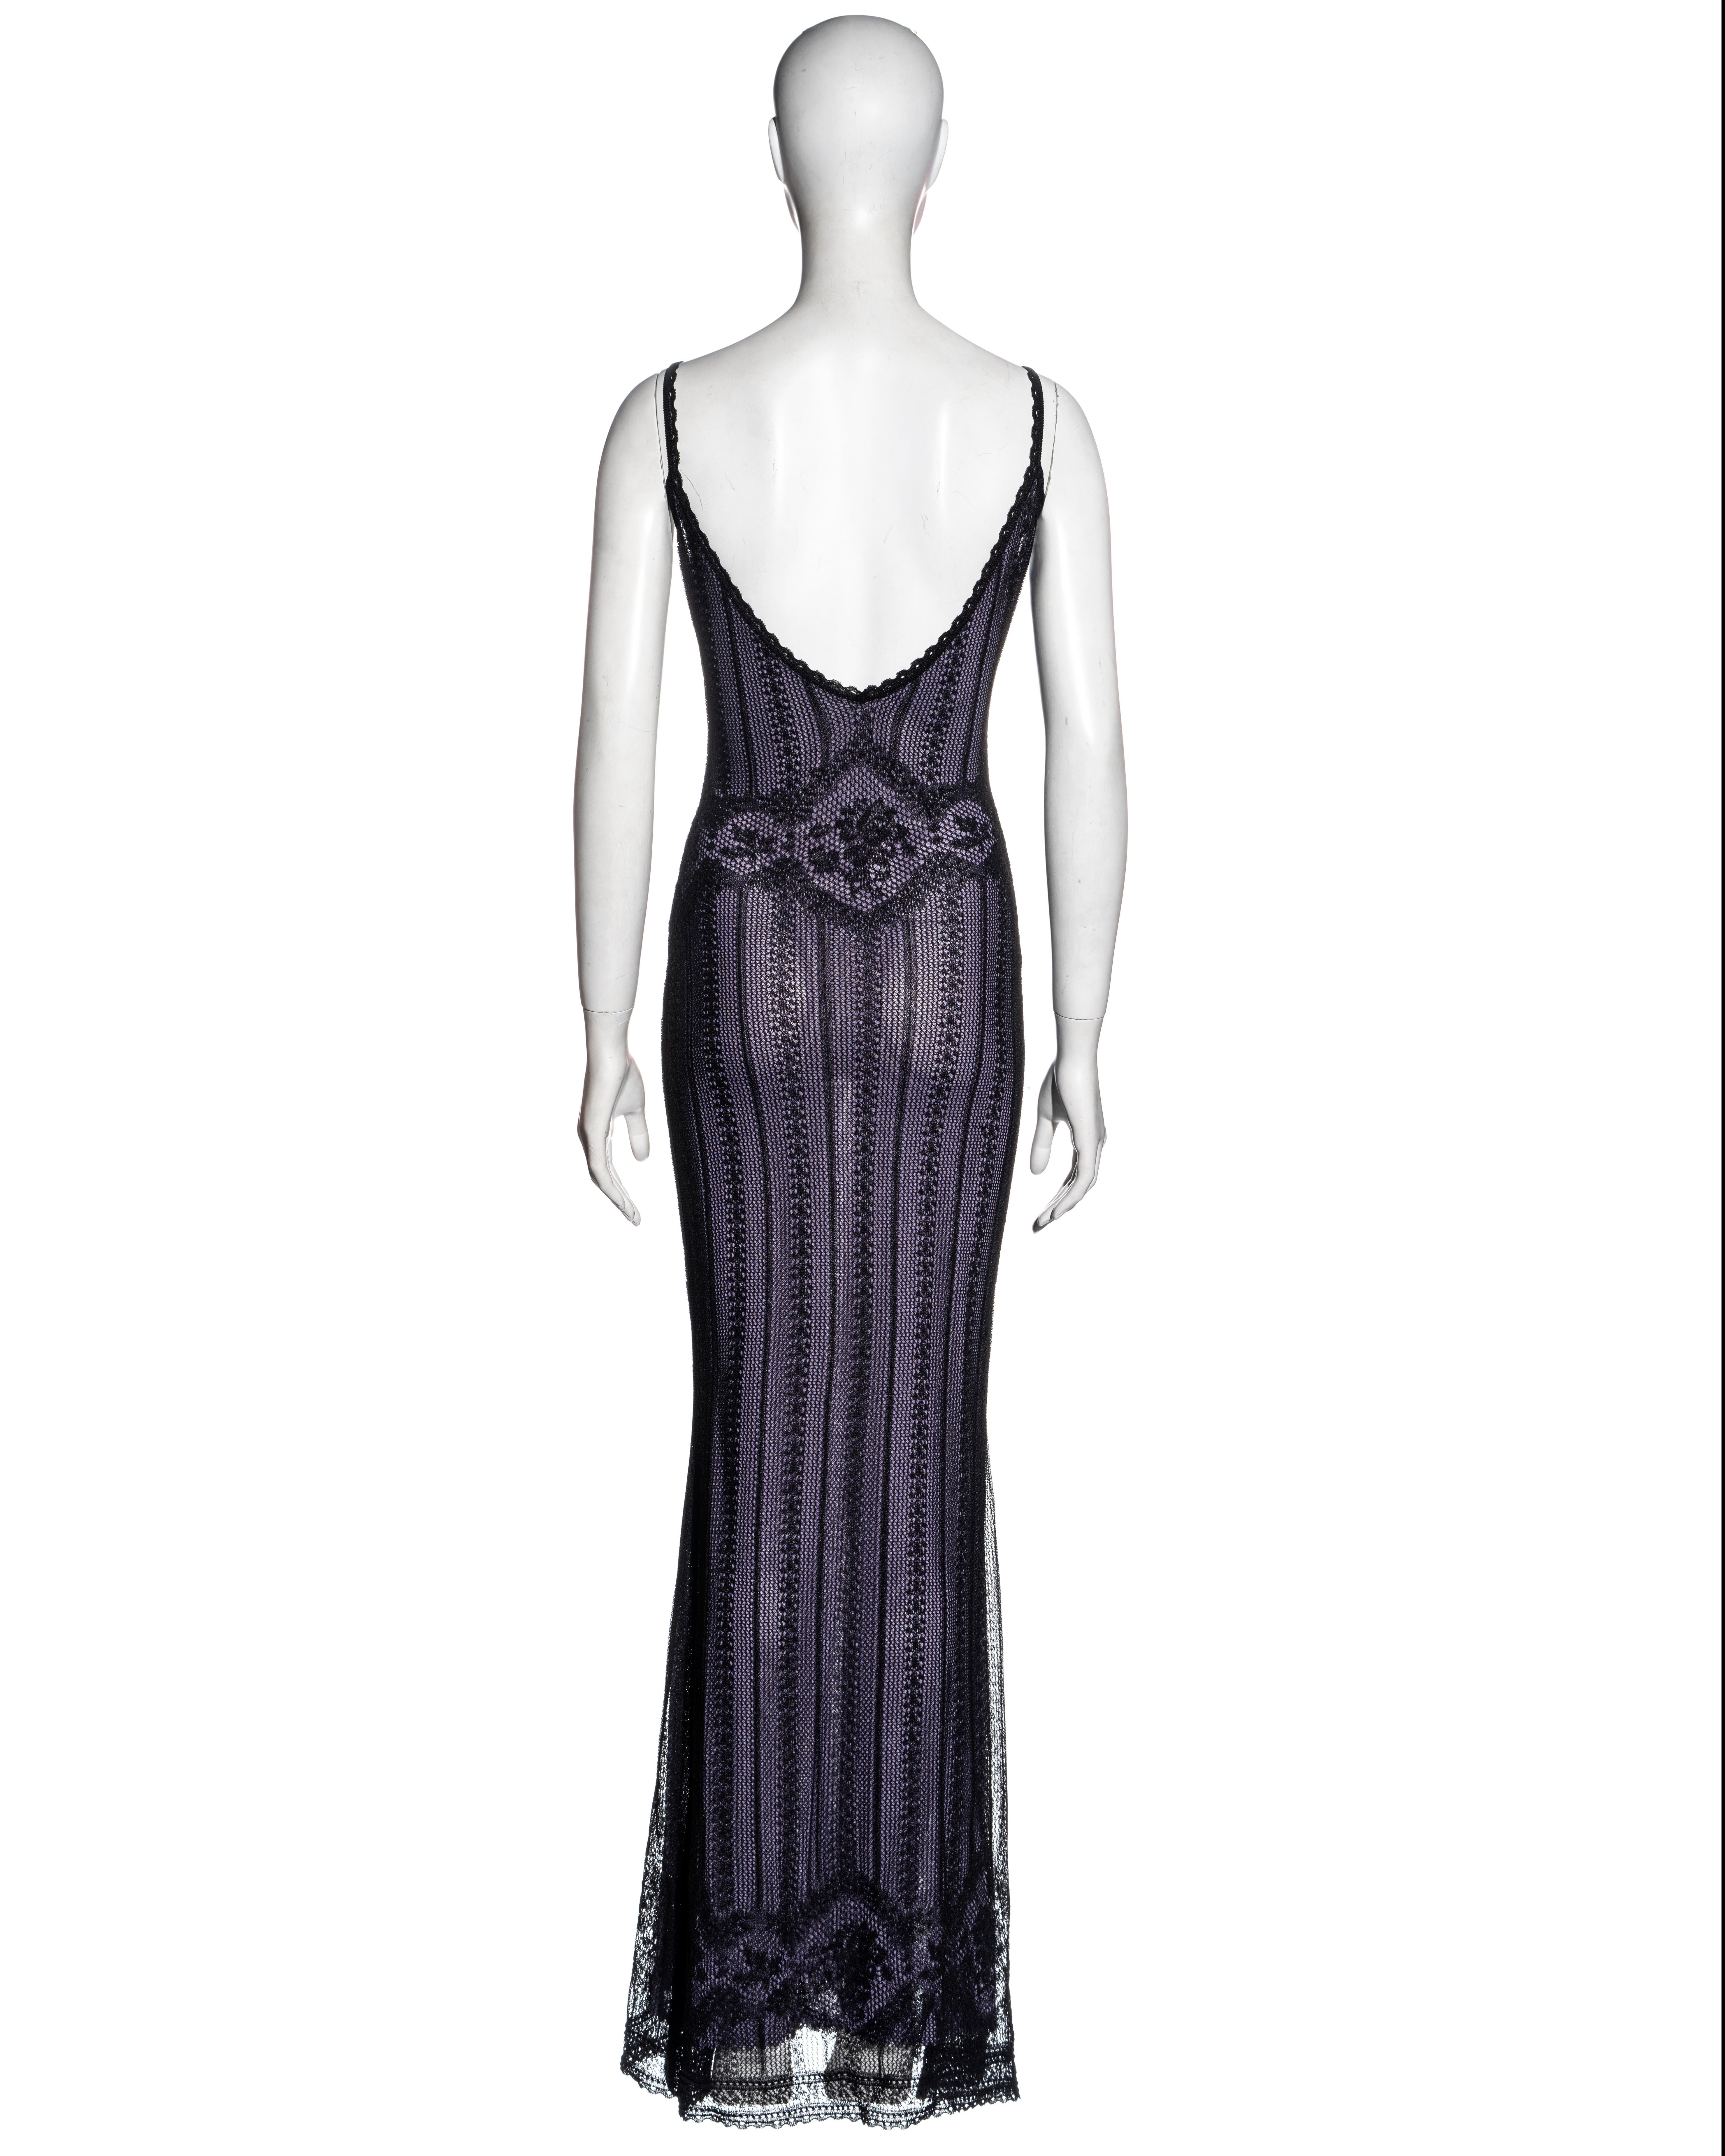 Christian Dior by John Galliano black lace evening dress and shawl, fw 1998 For Sale 3